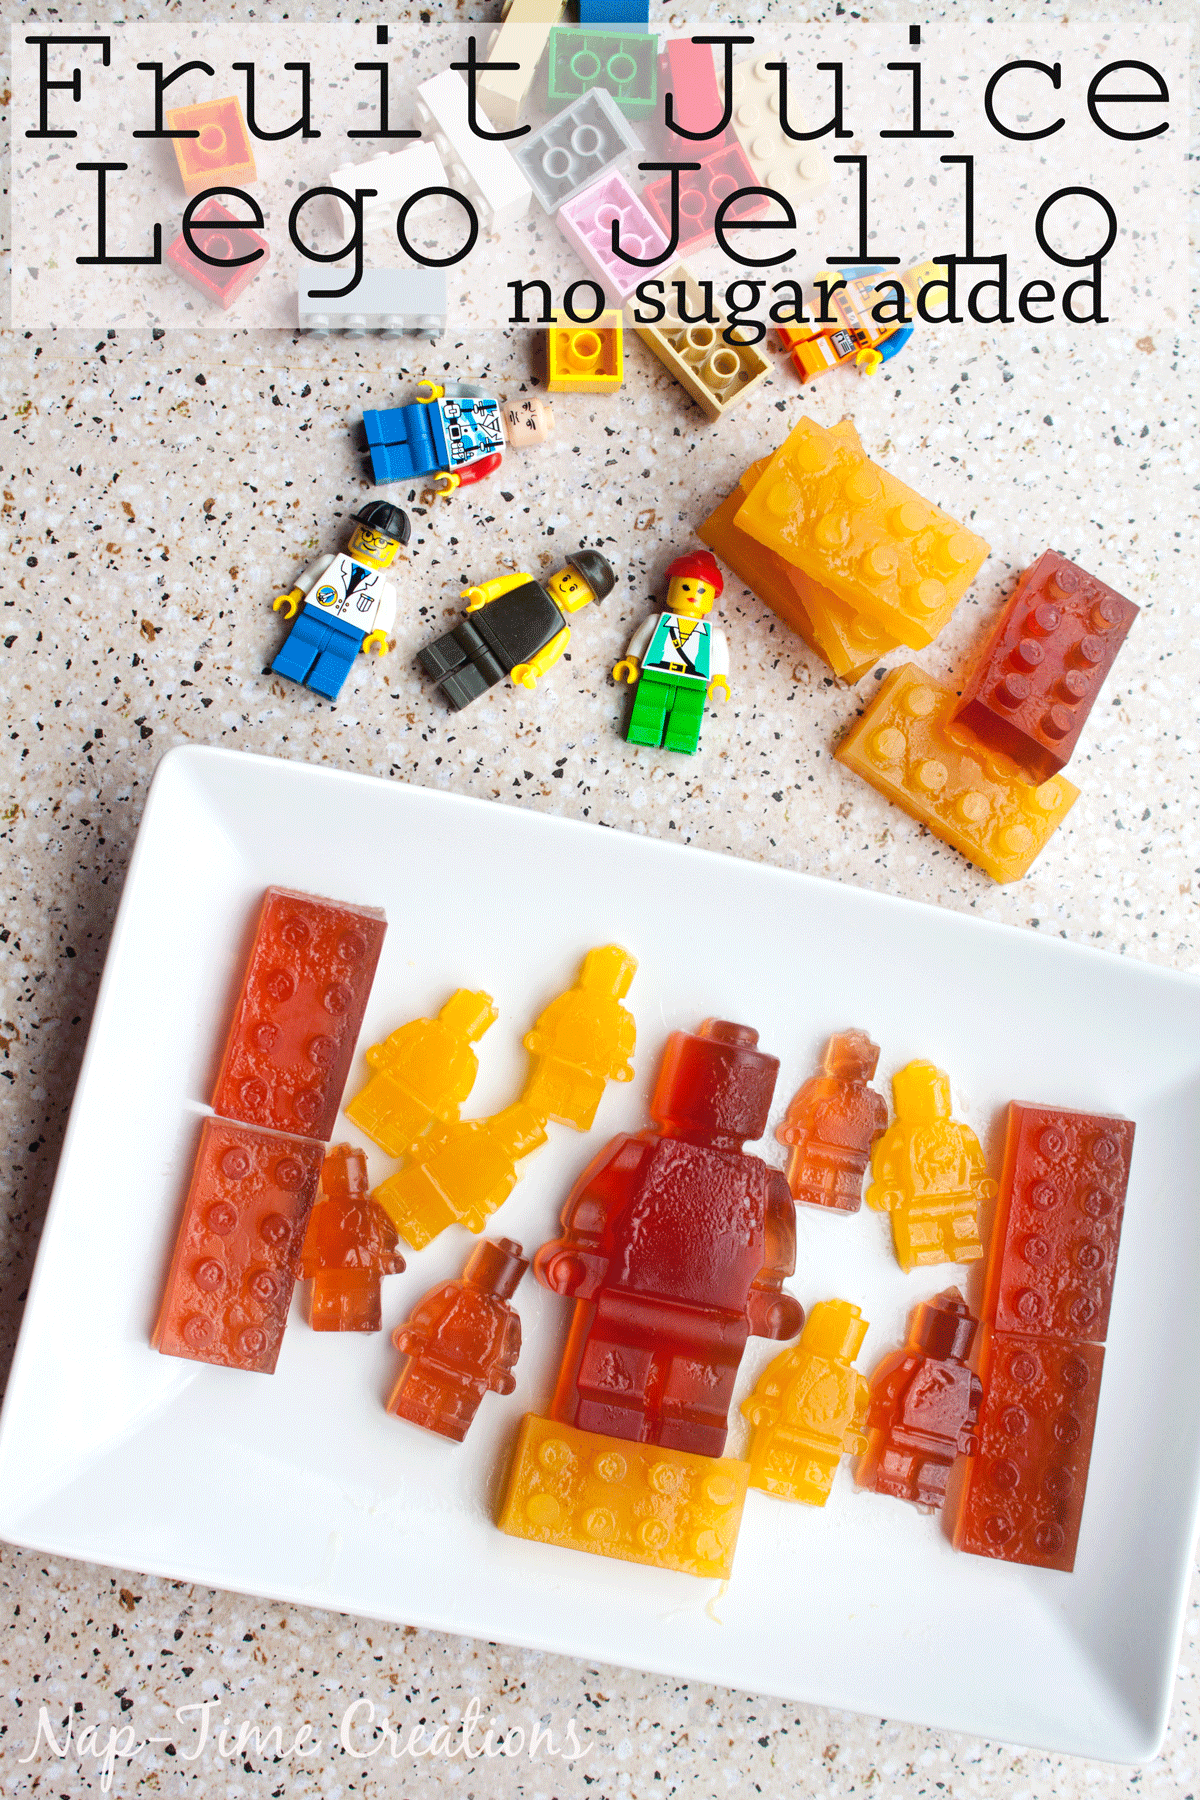 Fruit-Juice-Lego-Jello-no-sugar-added-from-Nap-Time-Creations